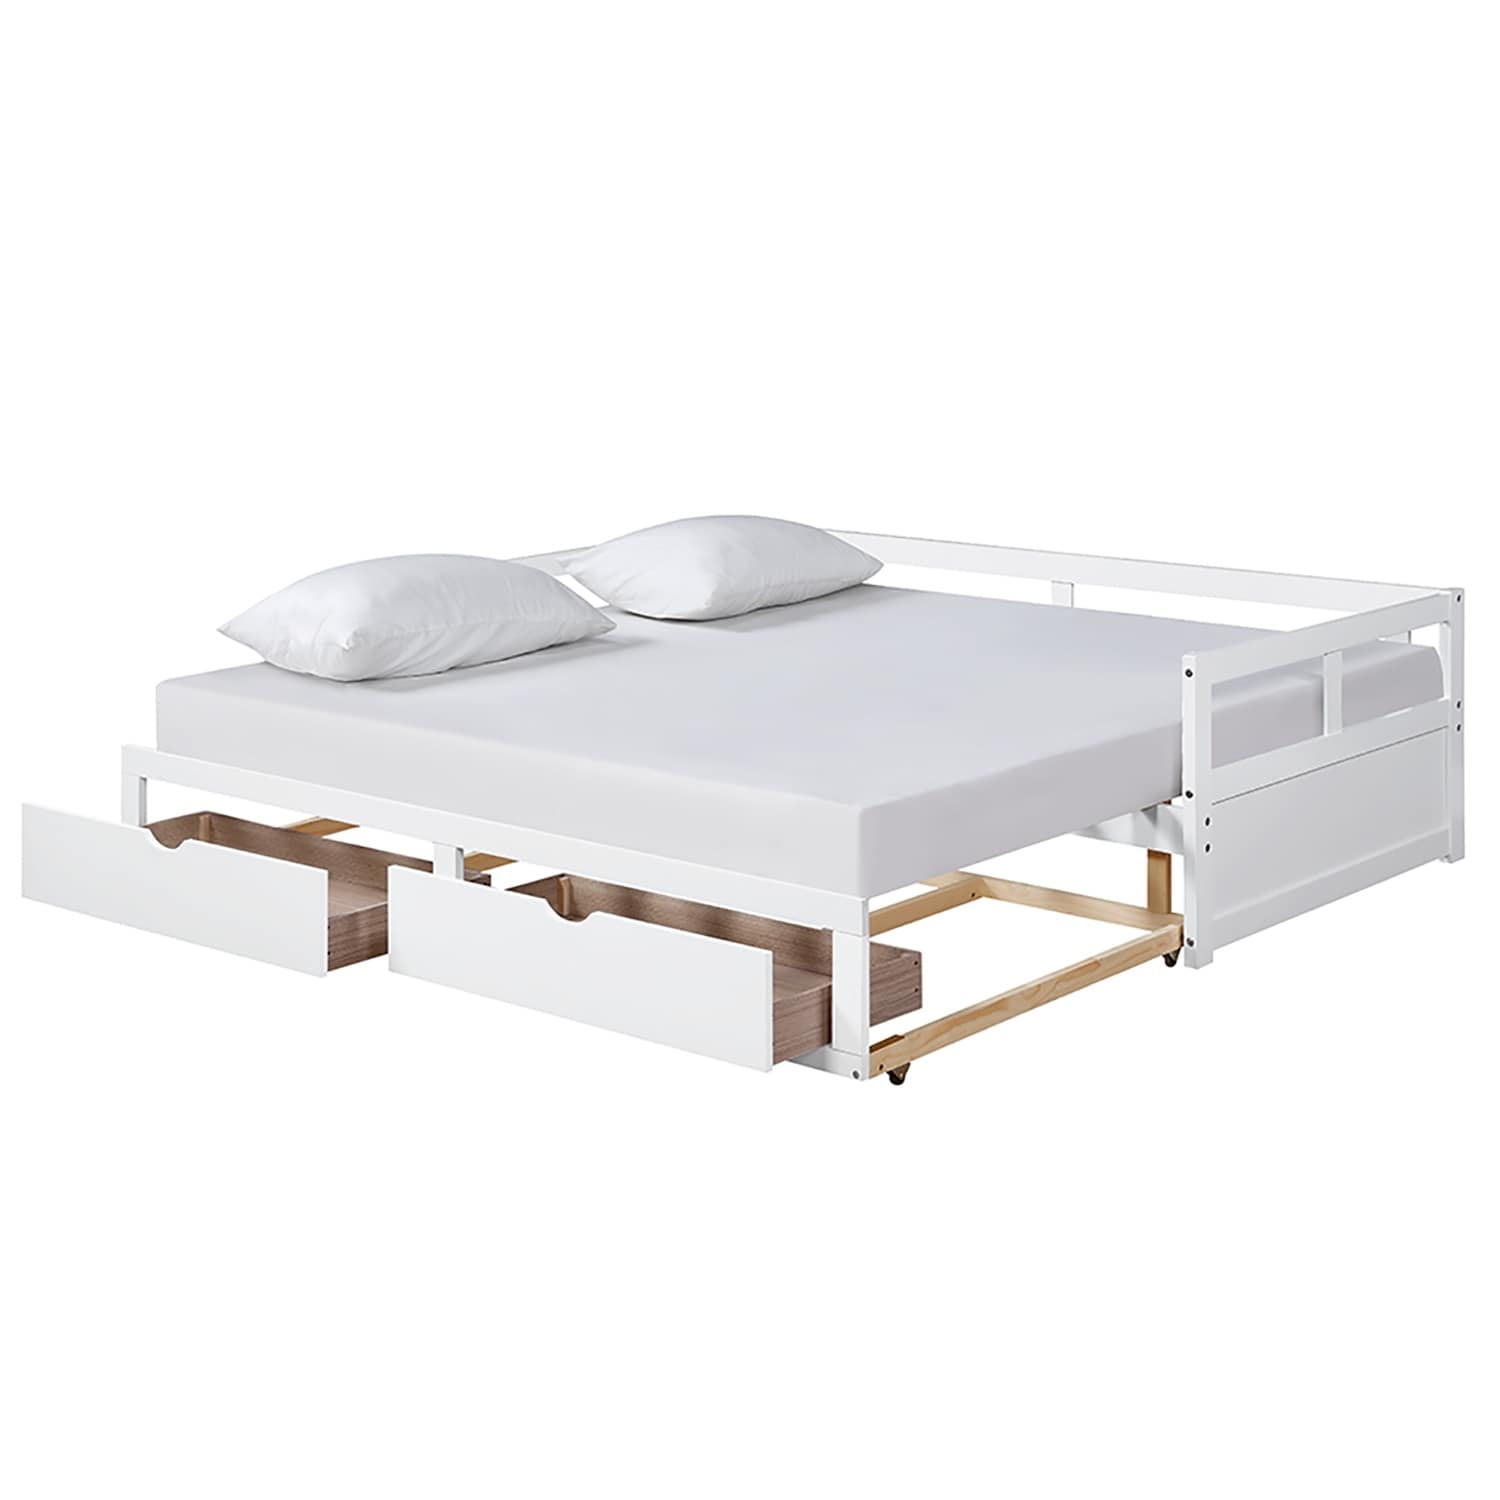 Twin Wooden Daybed With 1 Trundle And 2 Storage Drawers  Extendable Bed Daybed  Sofa Bed For Bedroom Living Room  White